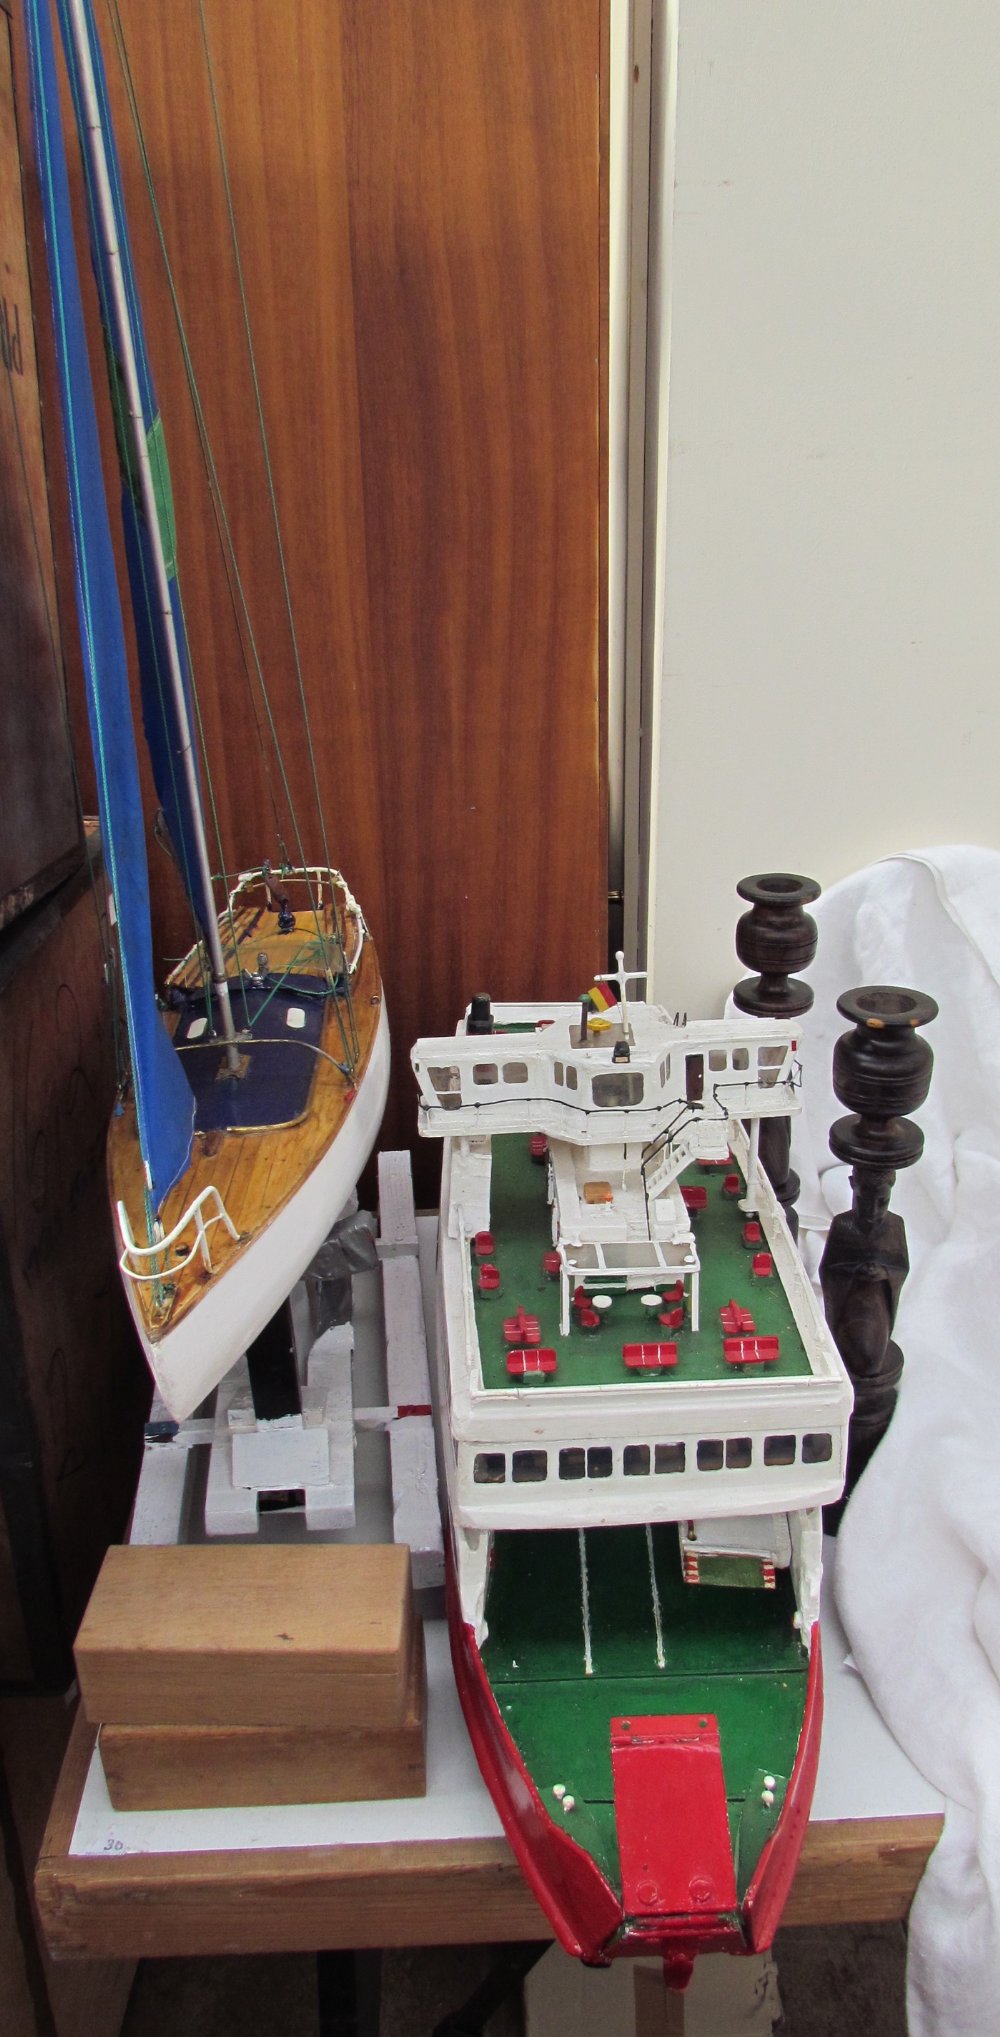 A model of a Red Funnel ferry together with a model yacht and a pair of carved African candlesticks